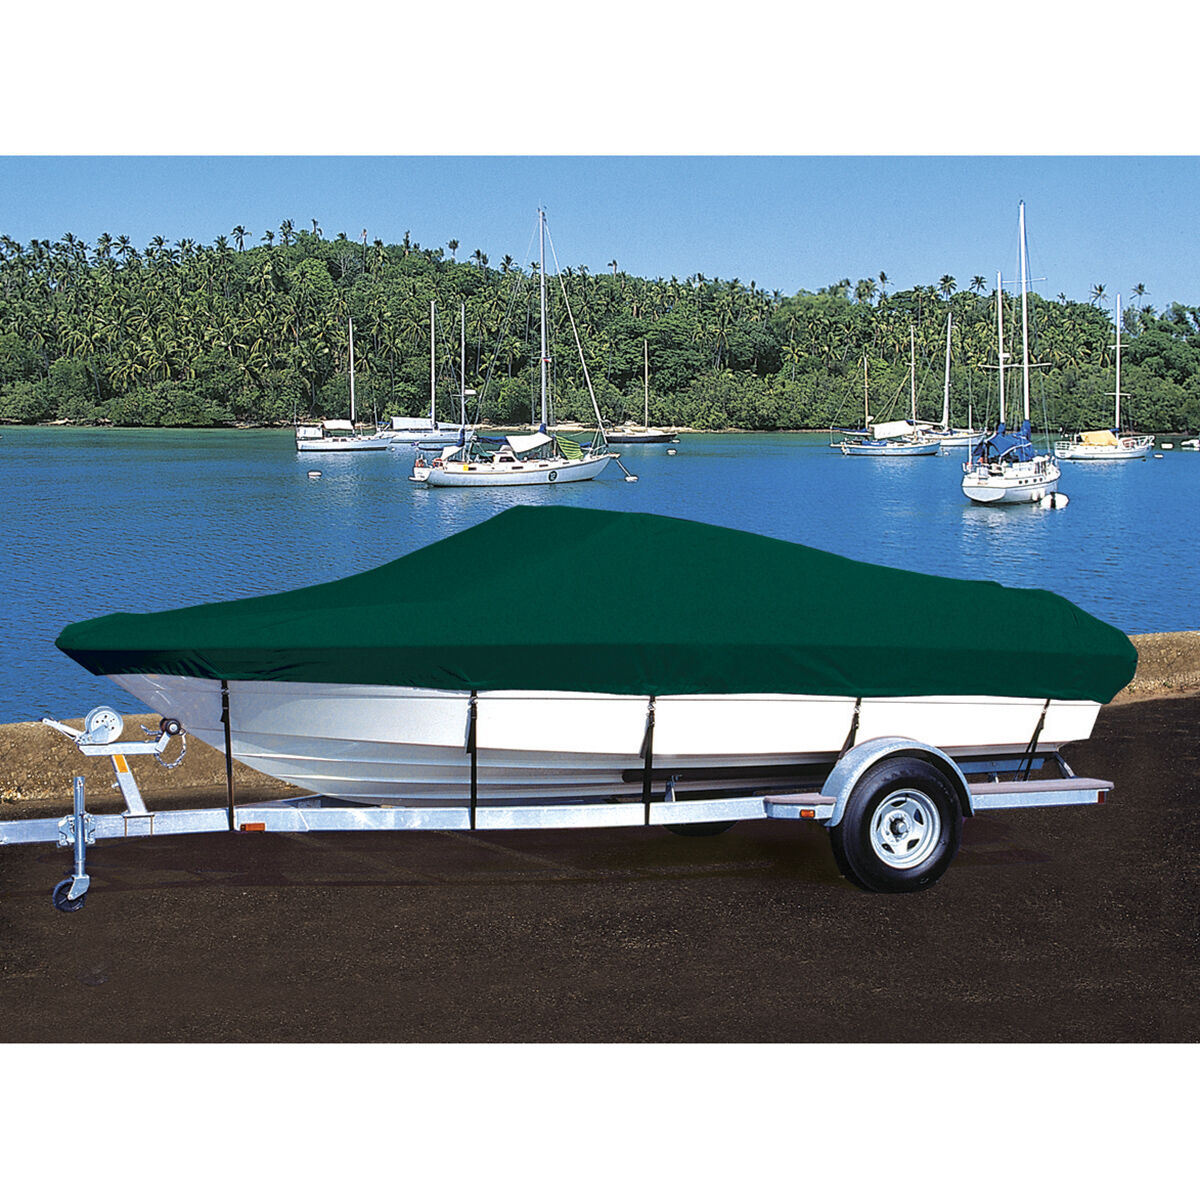 Taylor Made Trailerite Hot Shot Cover for 95-98 Boston Whaler 13 Dauntless CC O/B Boat Cover in Green Polyester